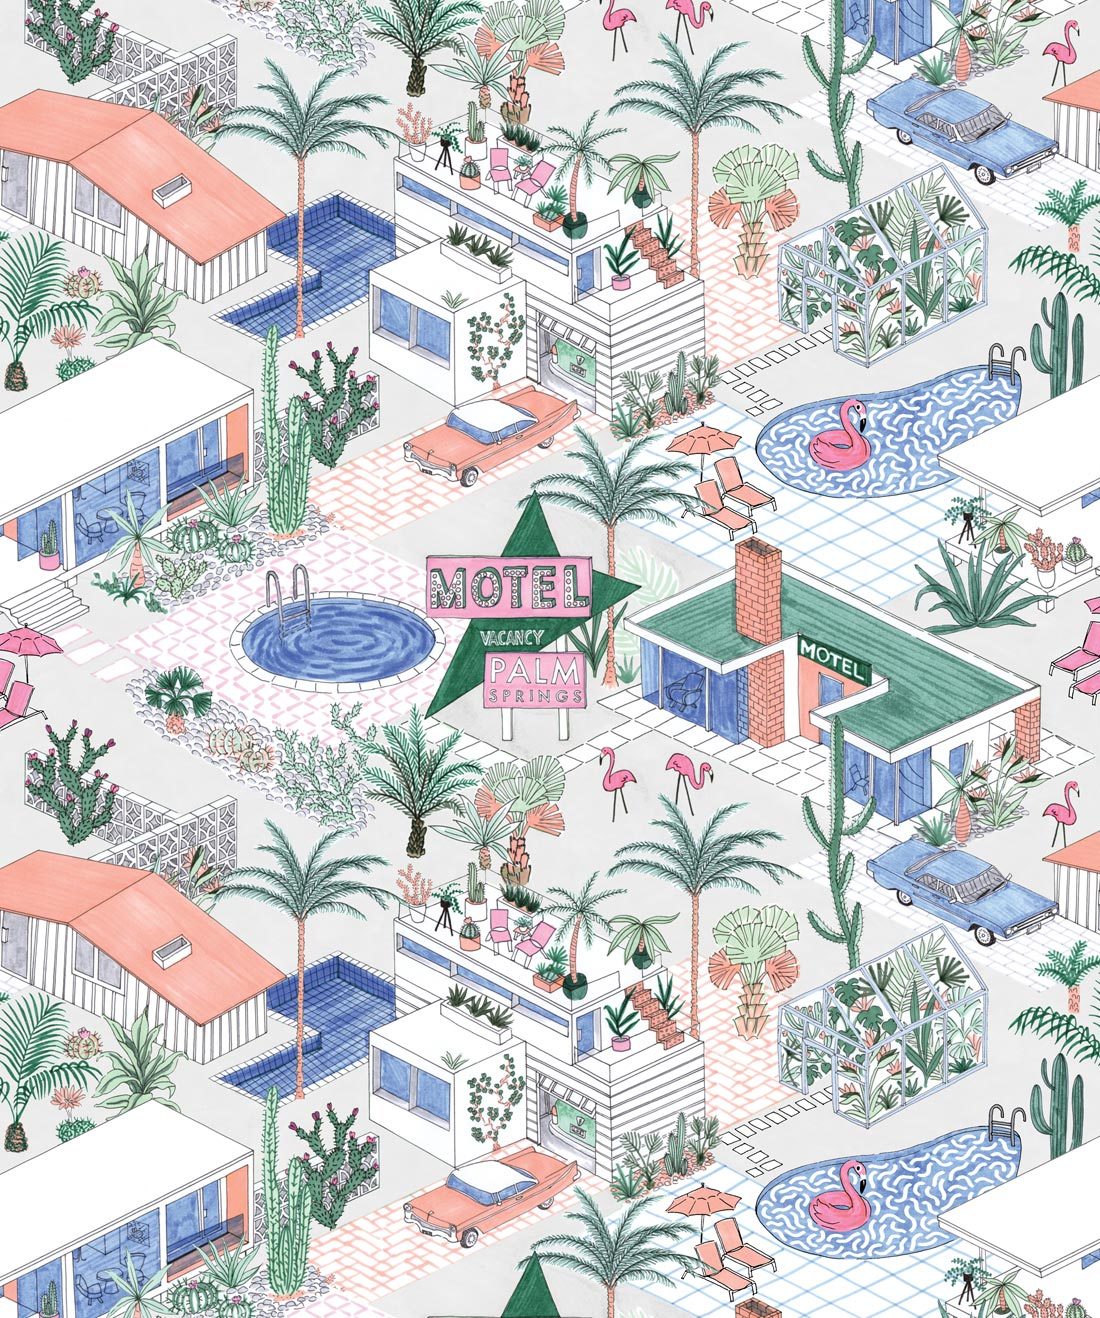 Palms Springs is a Mid century urban wallpaper